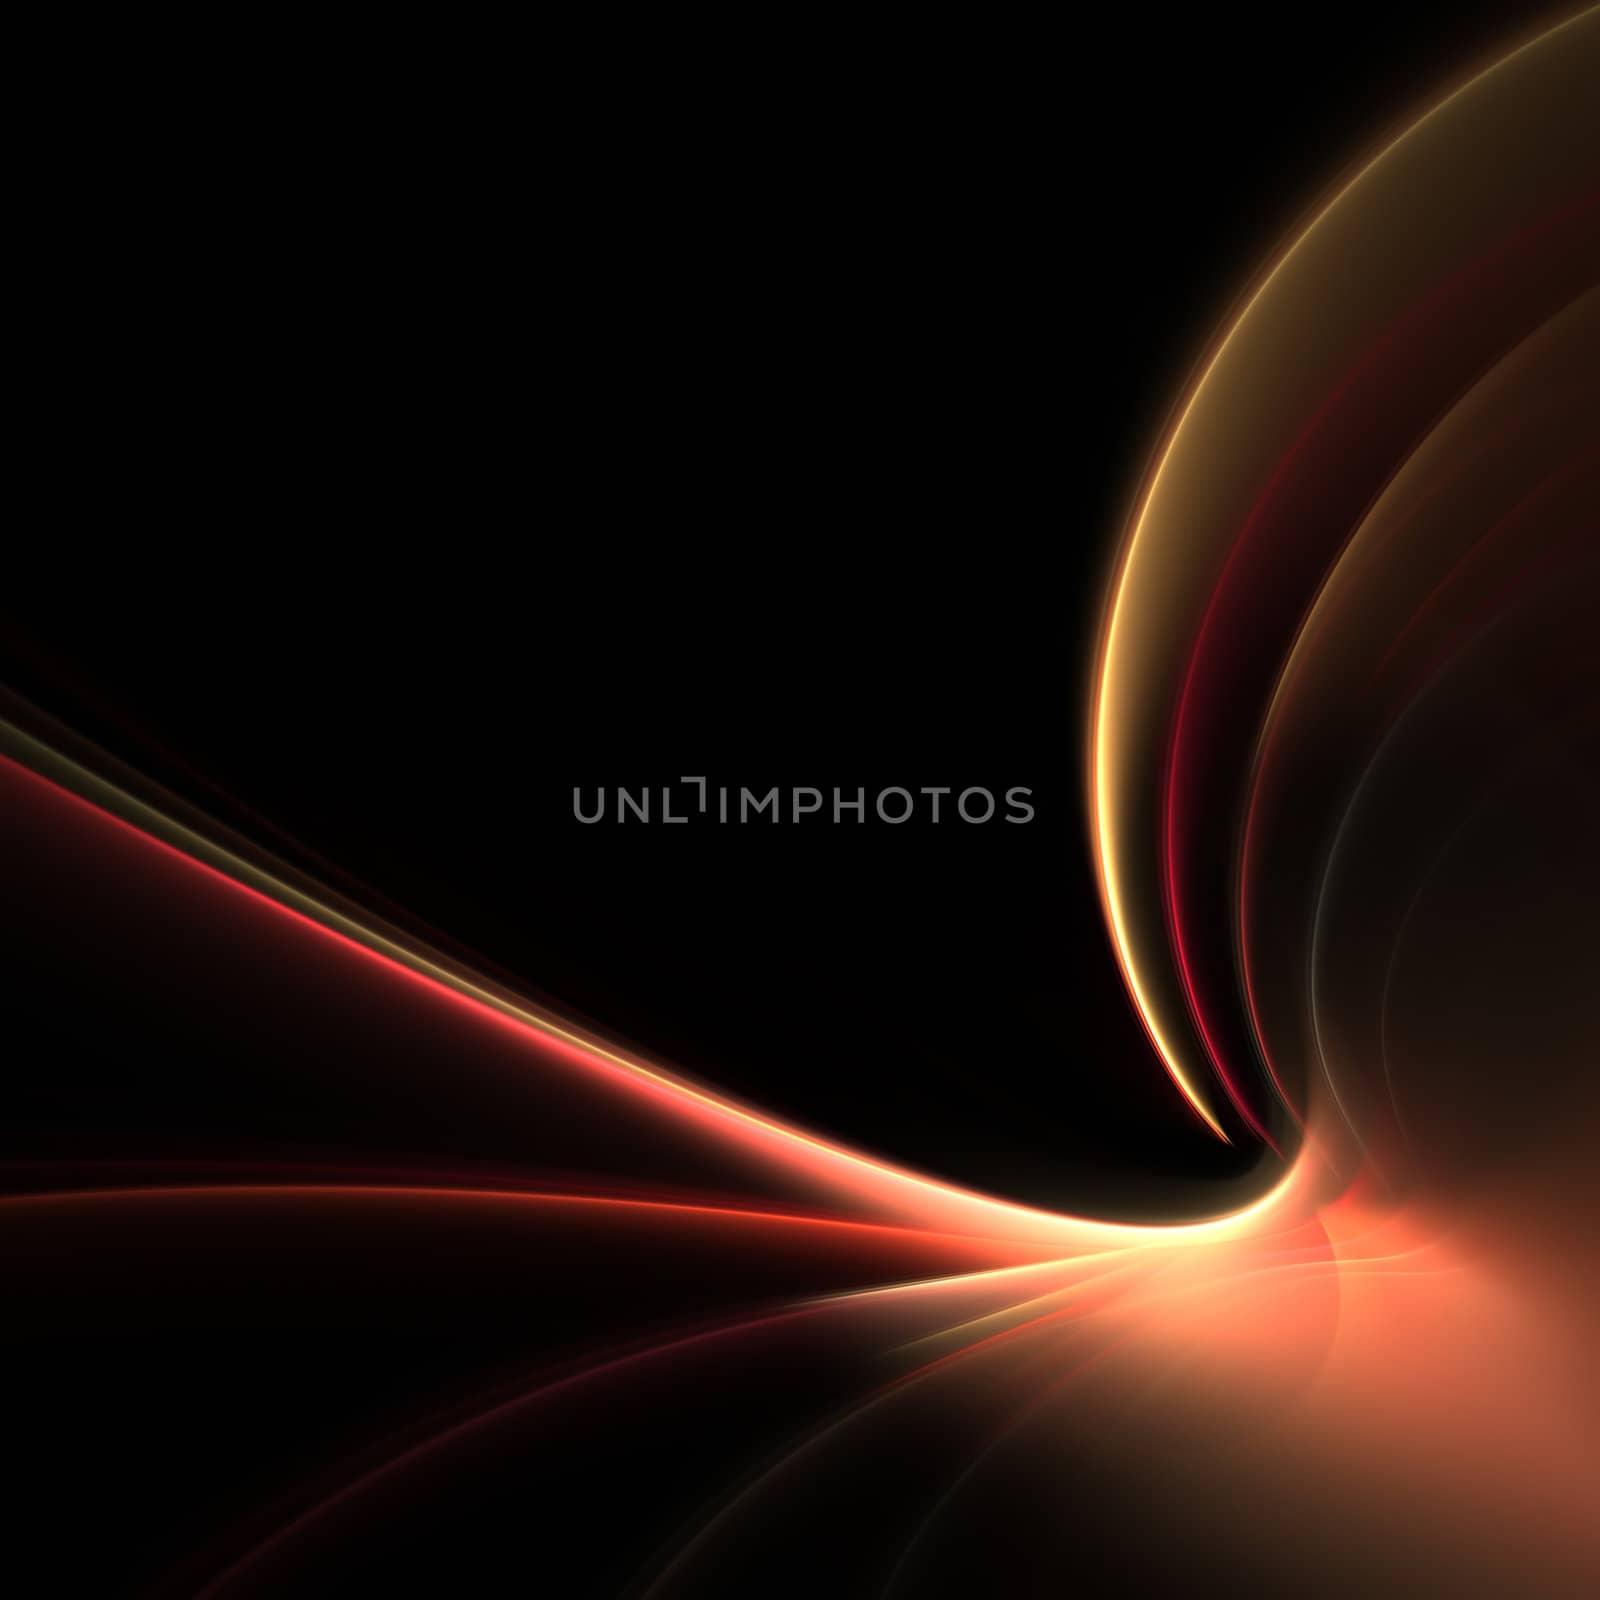 Glowing Reddish Waves by graficallyminded